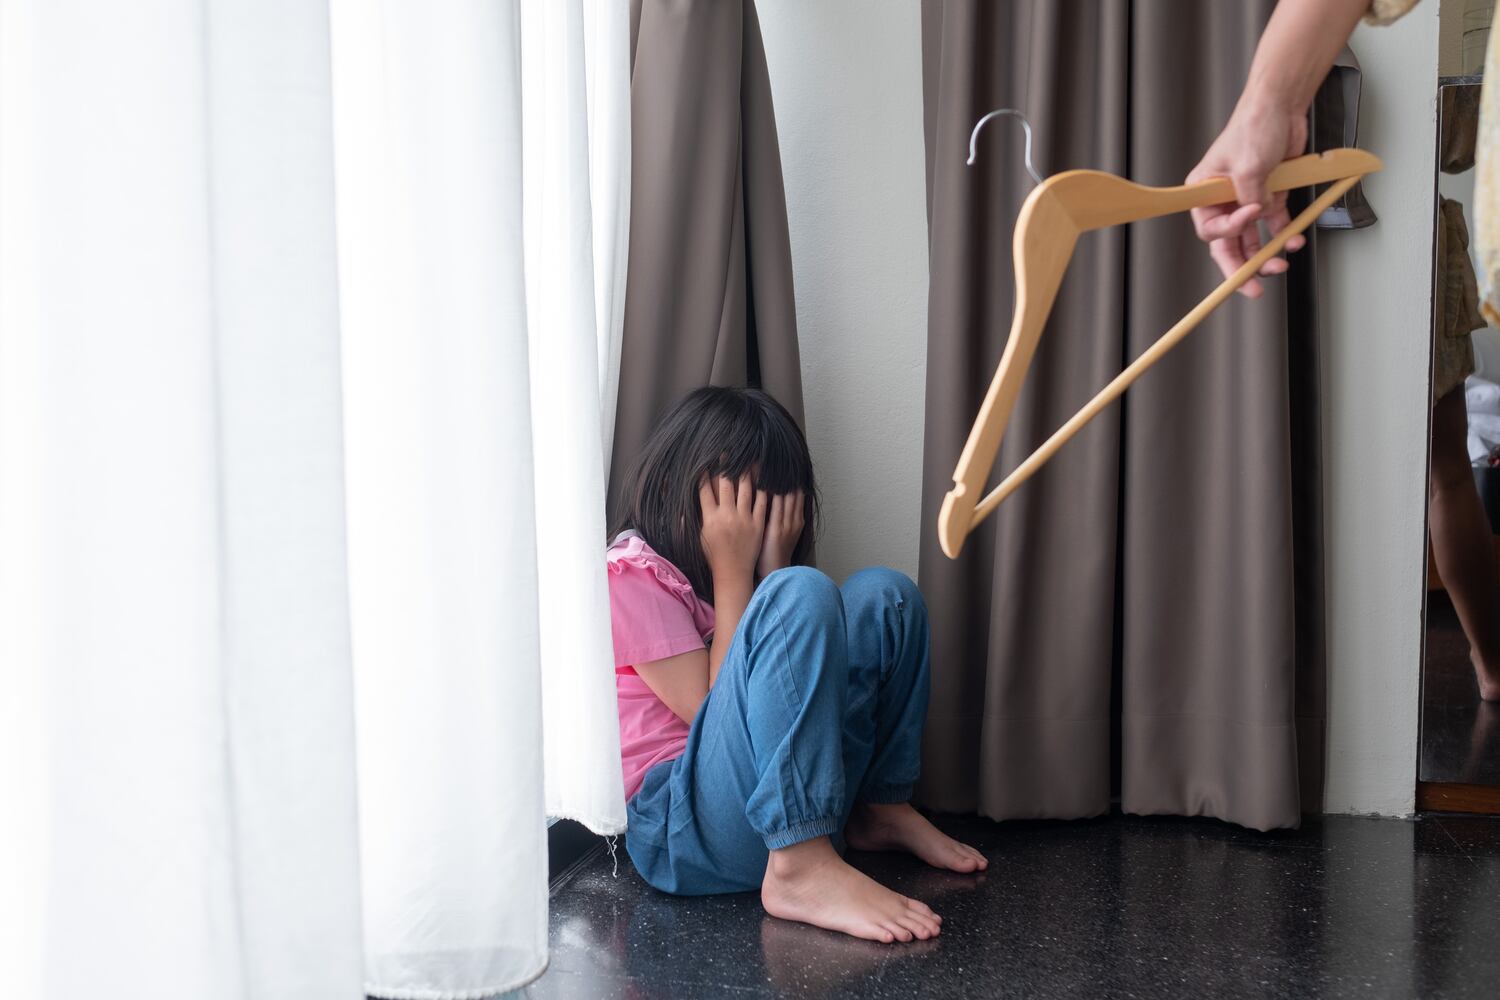 Spanking Kids – Good or Bad? Exploring the Controversy